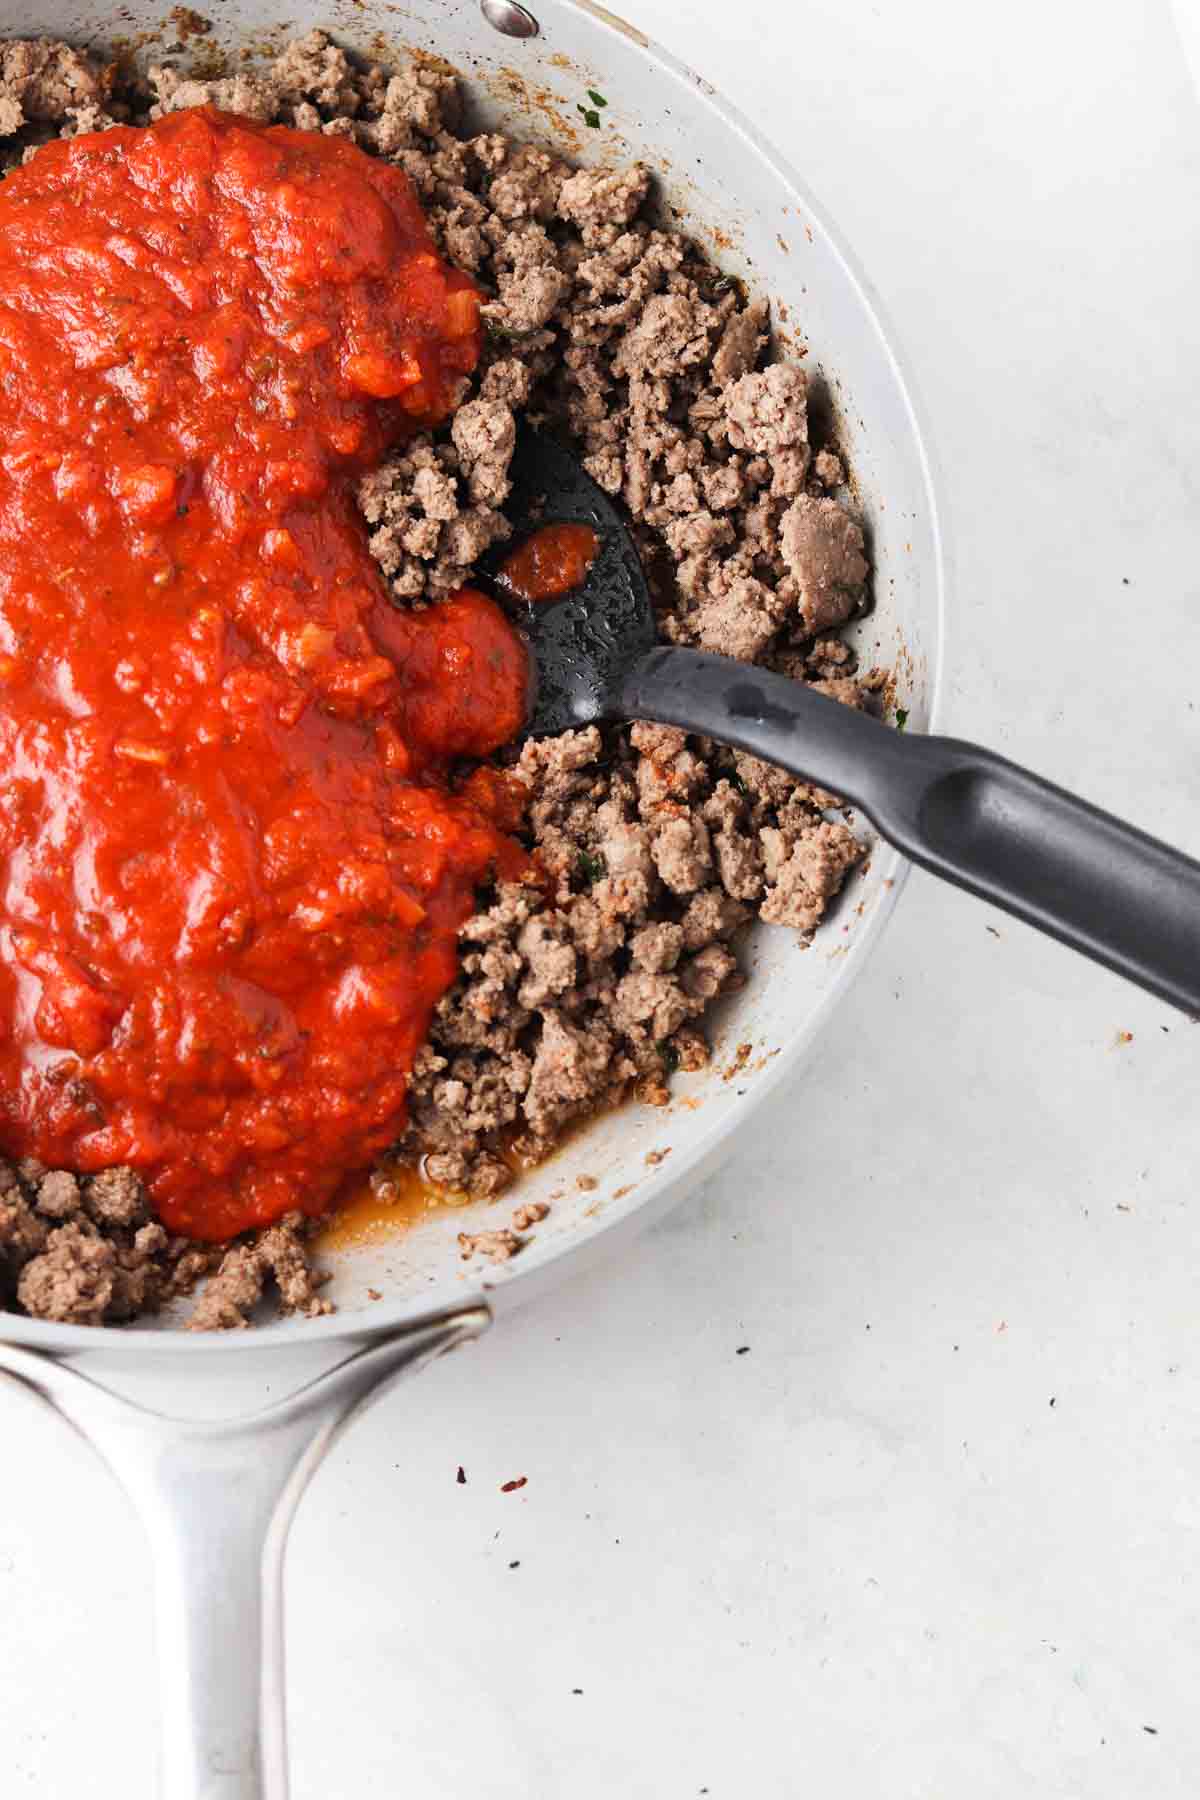 Ground beef in a skillet with red sauce and spices.